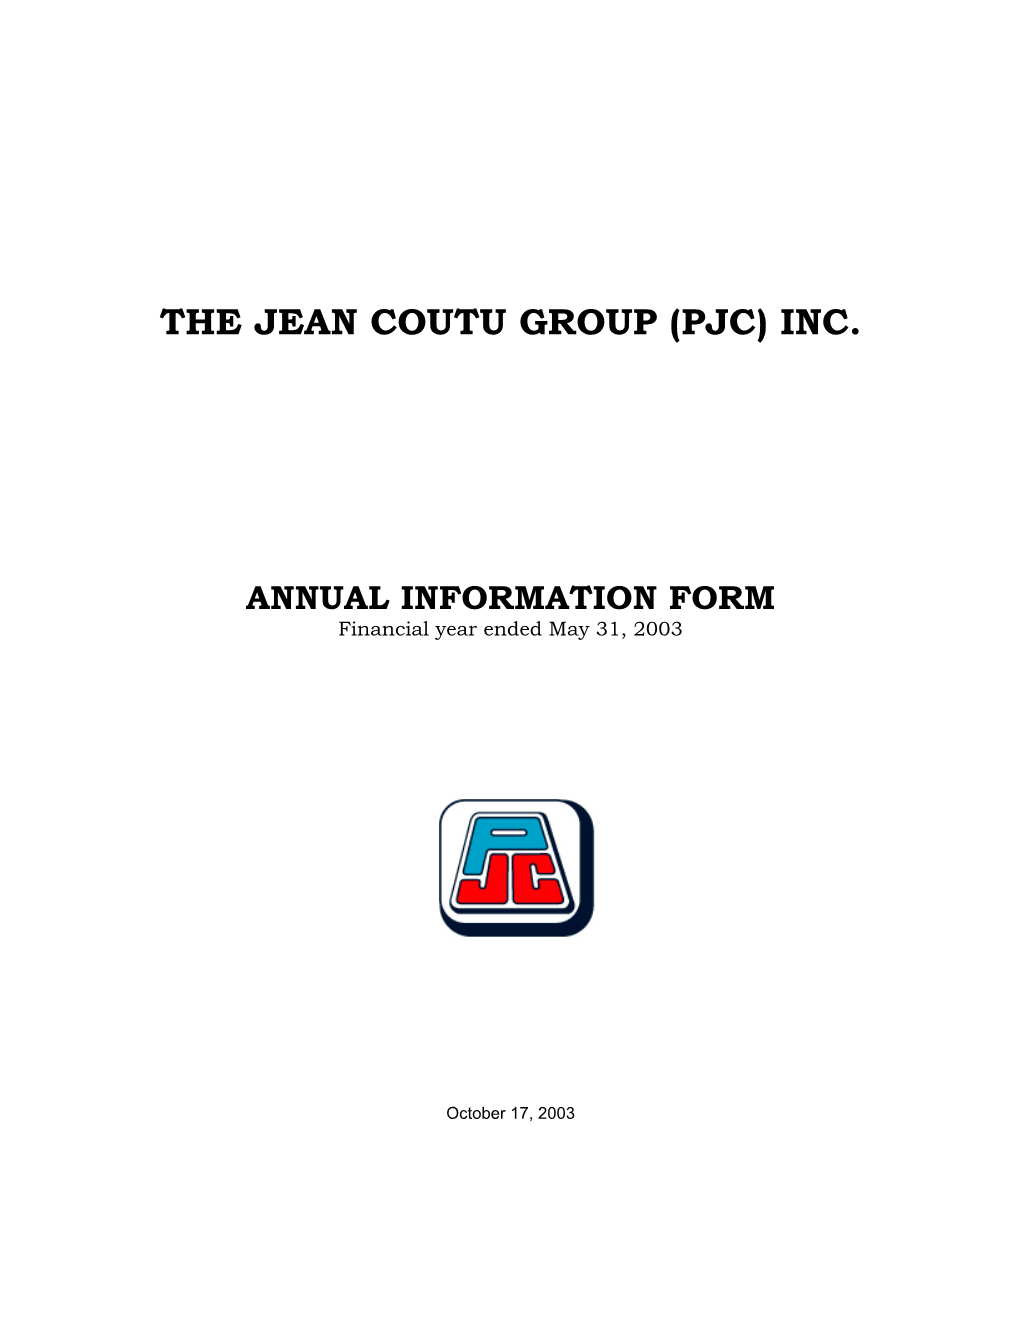 The Jean Coutu Group (Pjc) Inc